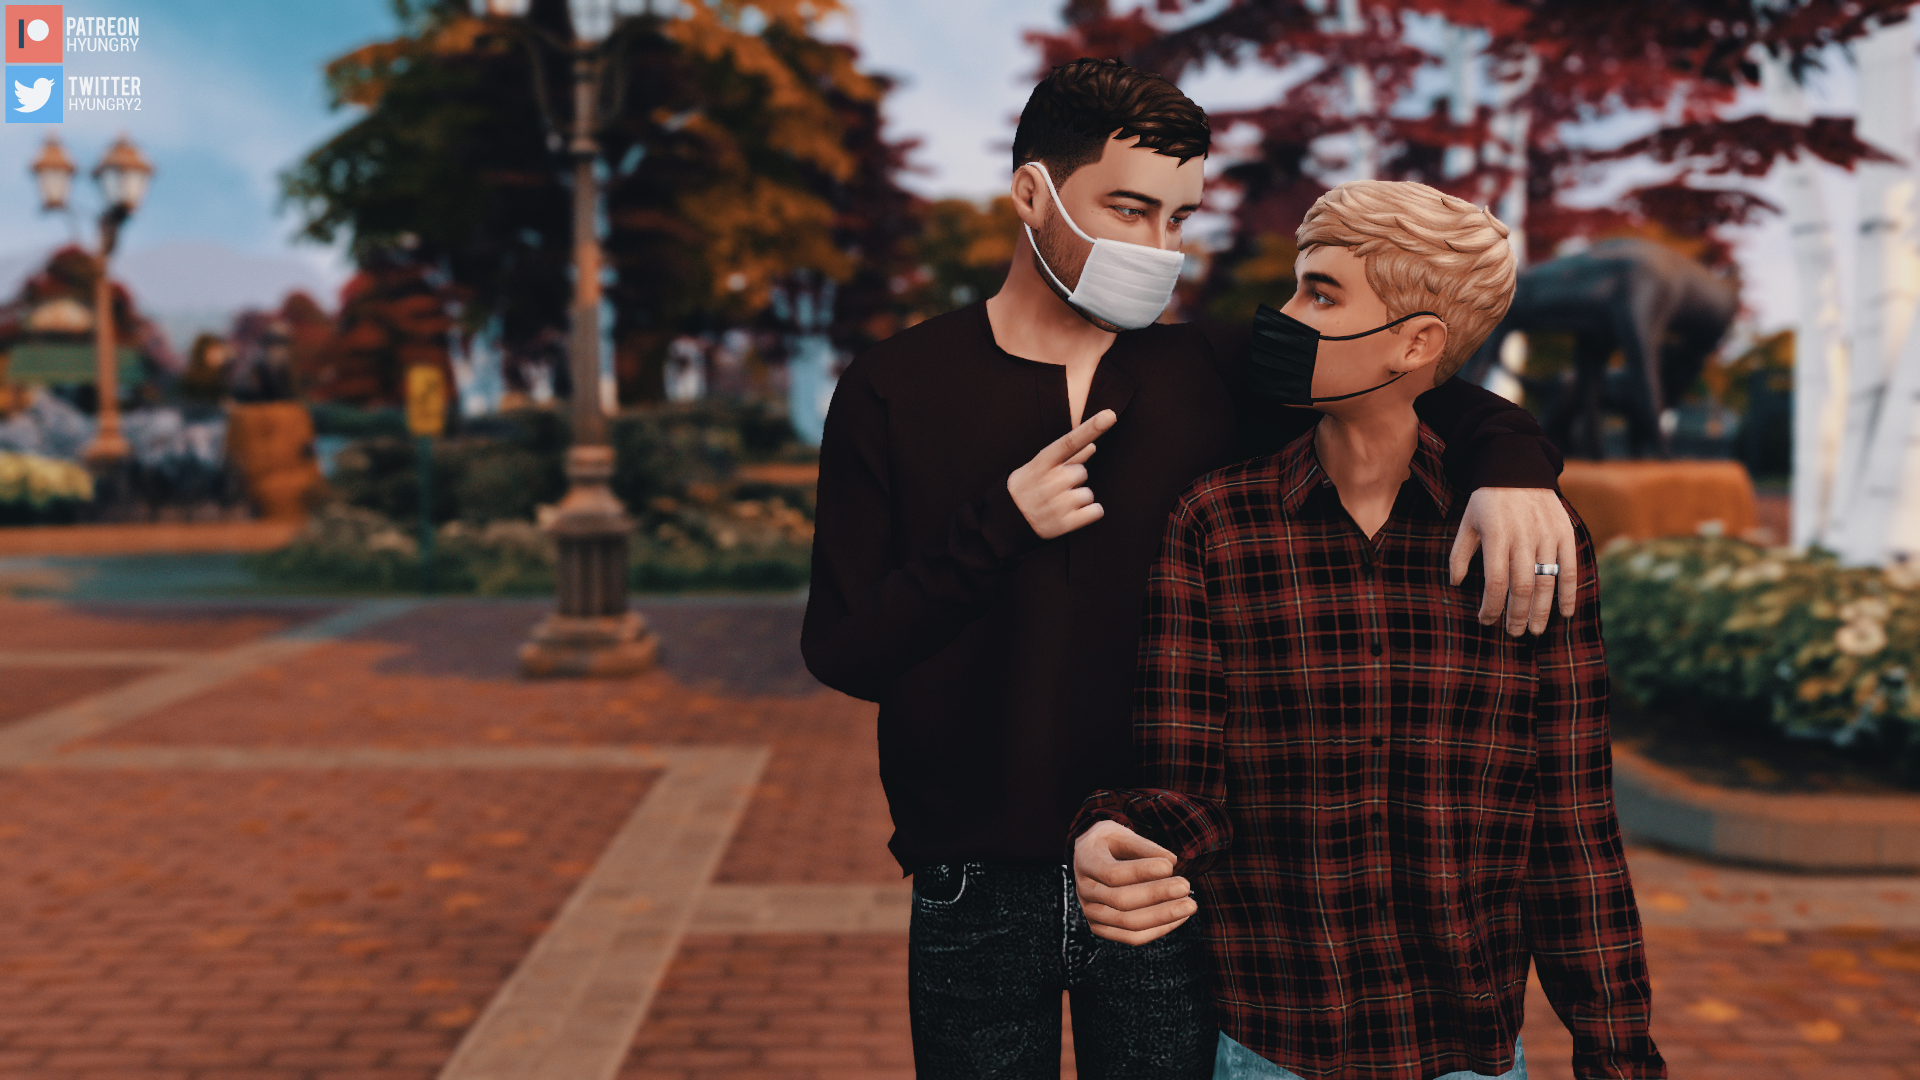 Hyungrys Gay Machinima Collection New 72520 Page 4 The Sims 4 General Discussion